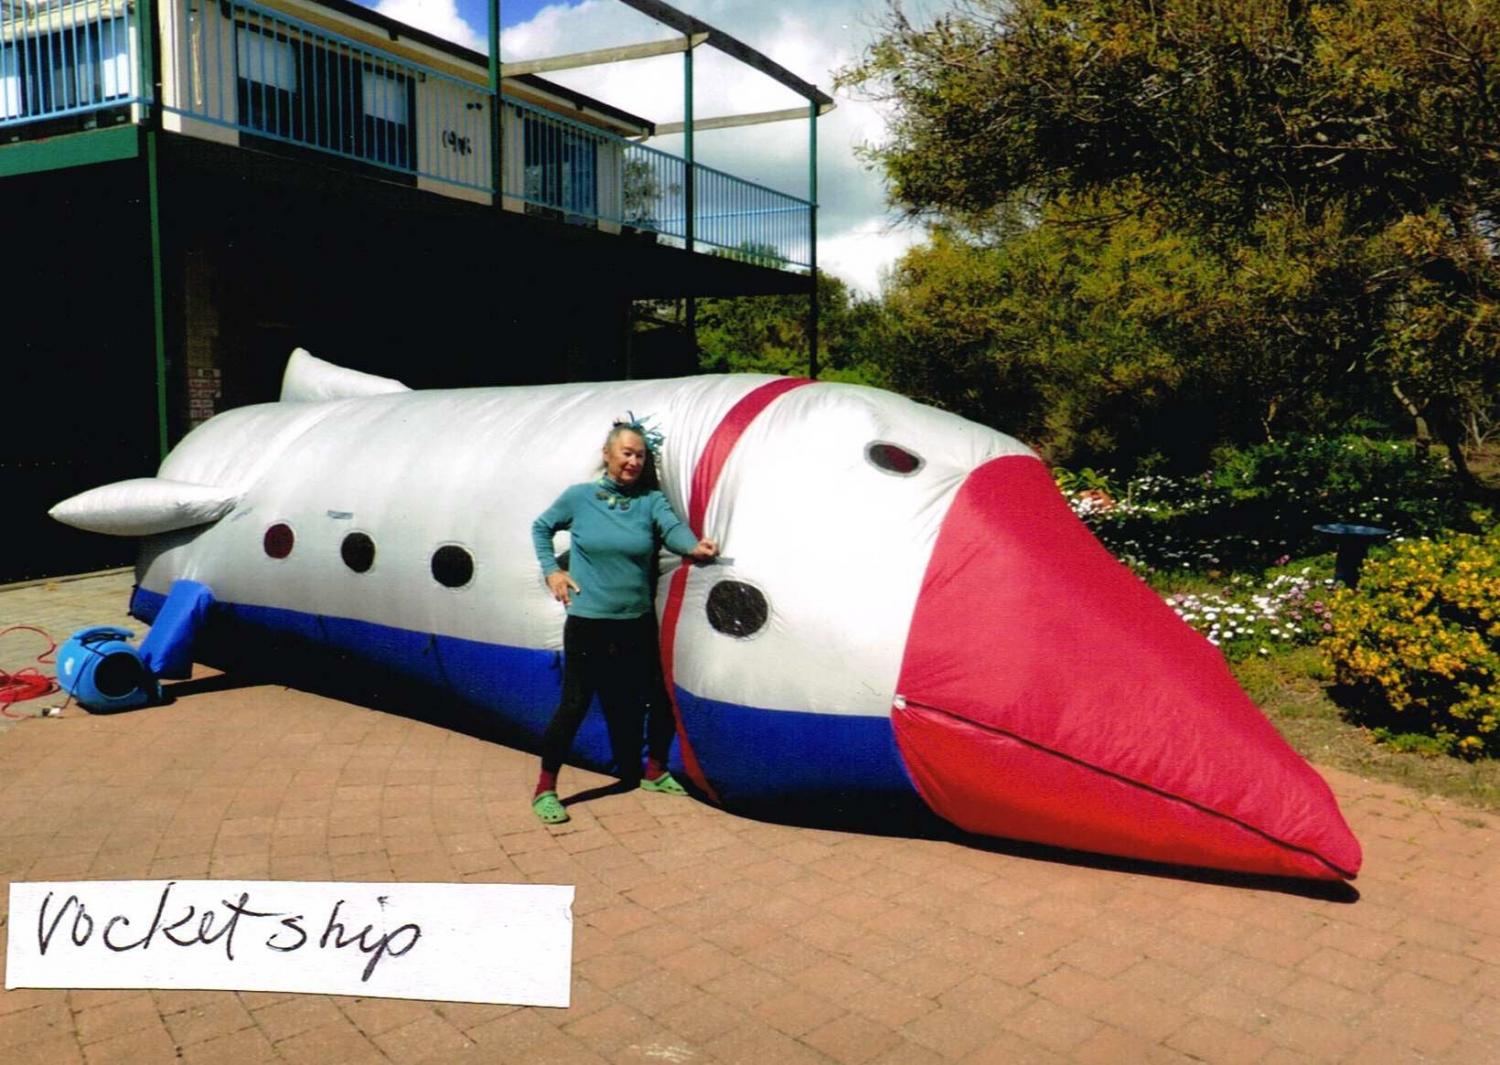 Giant inflatable space ship - Evelyn Roth